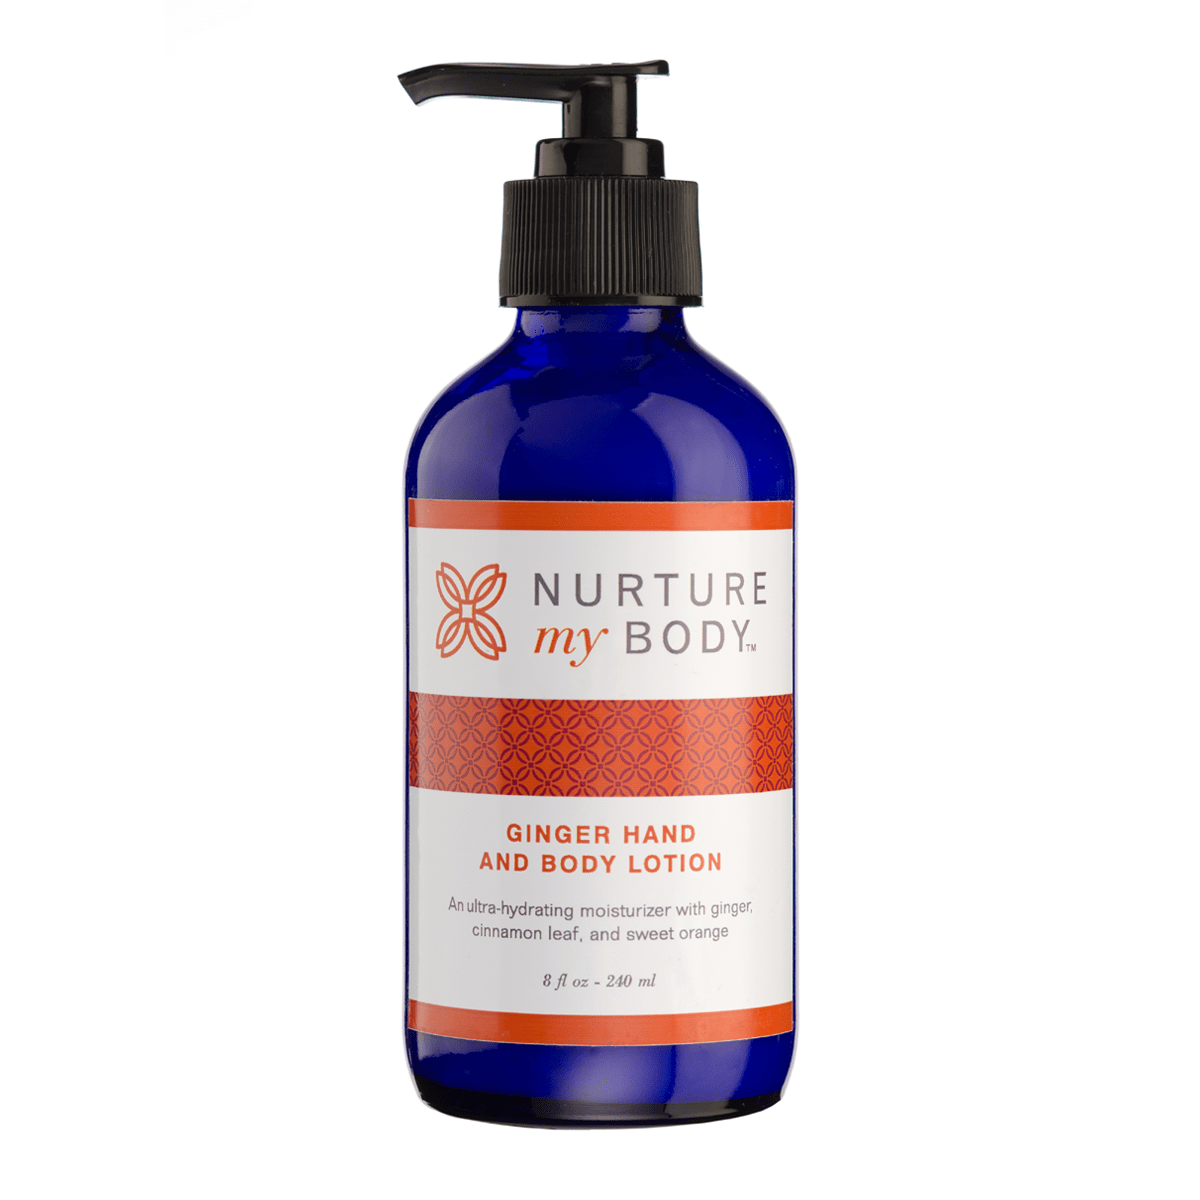 Nurture My Body All Natural Hand and Body Lotion | 8 oz.